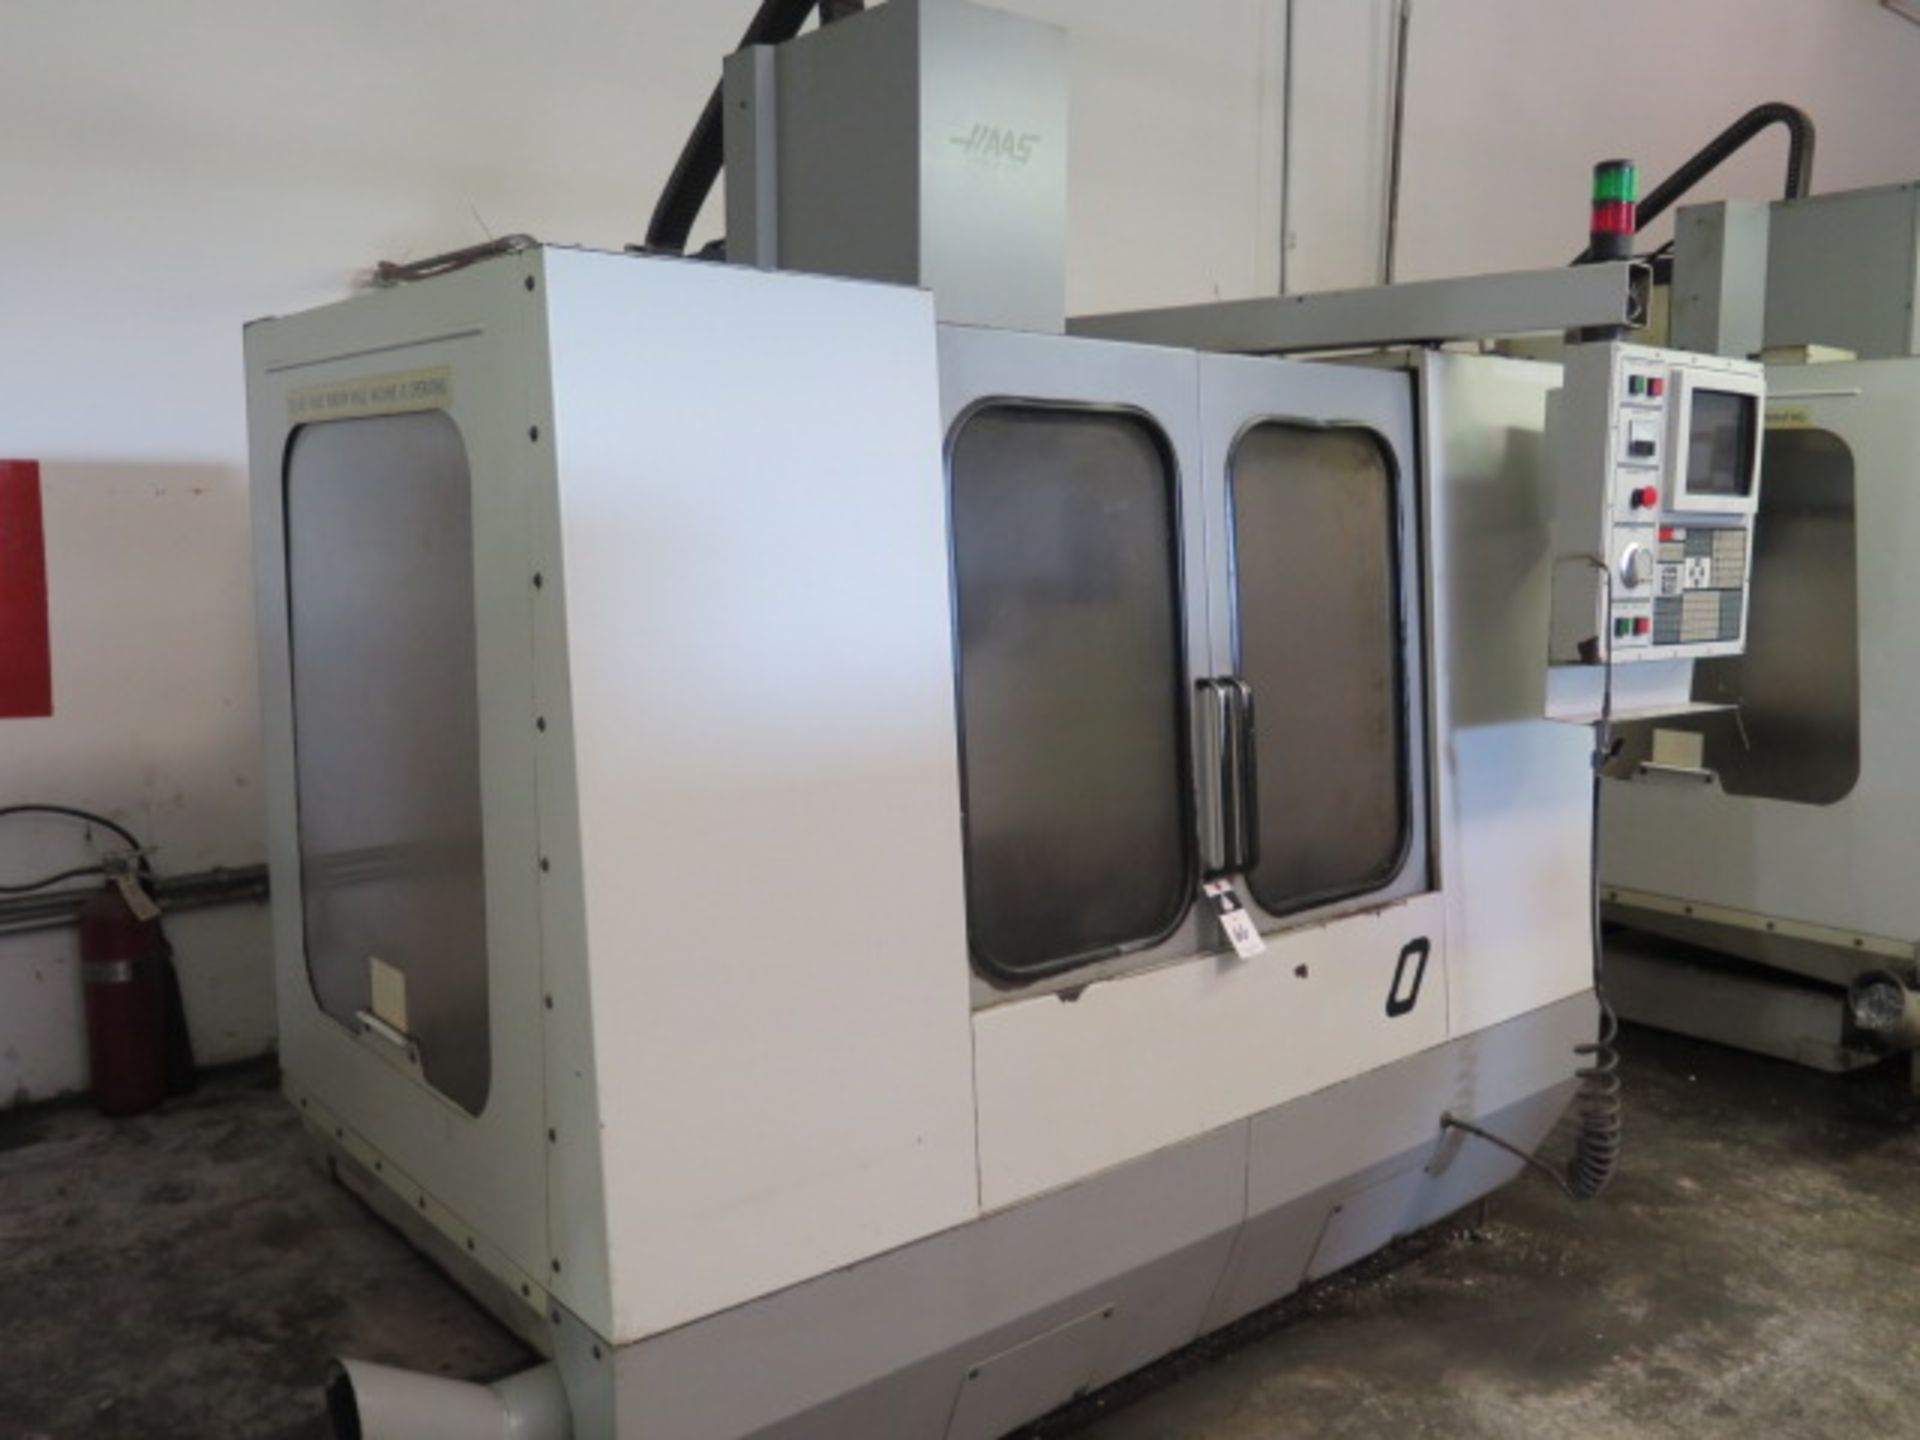 1994 Haas VF-0 CNC Vertical Machining Center s/n 3572 w/ Haas Controls, 20-Station ATC, CAT-40 Taper - Image 3 of 15